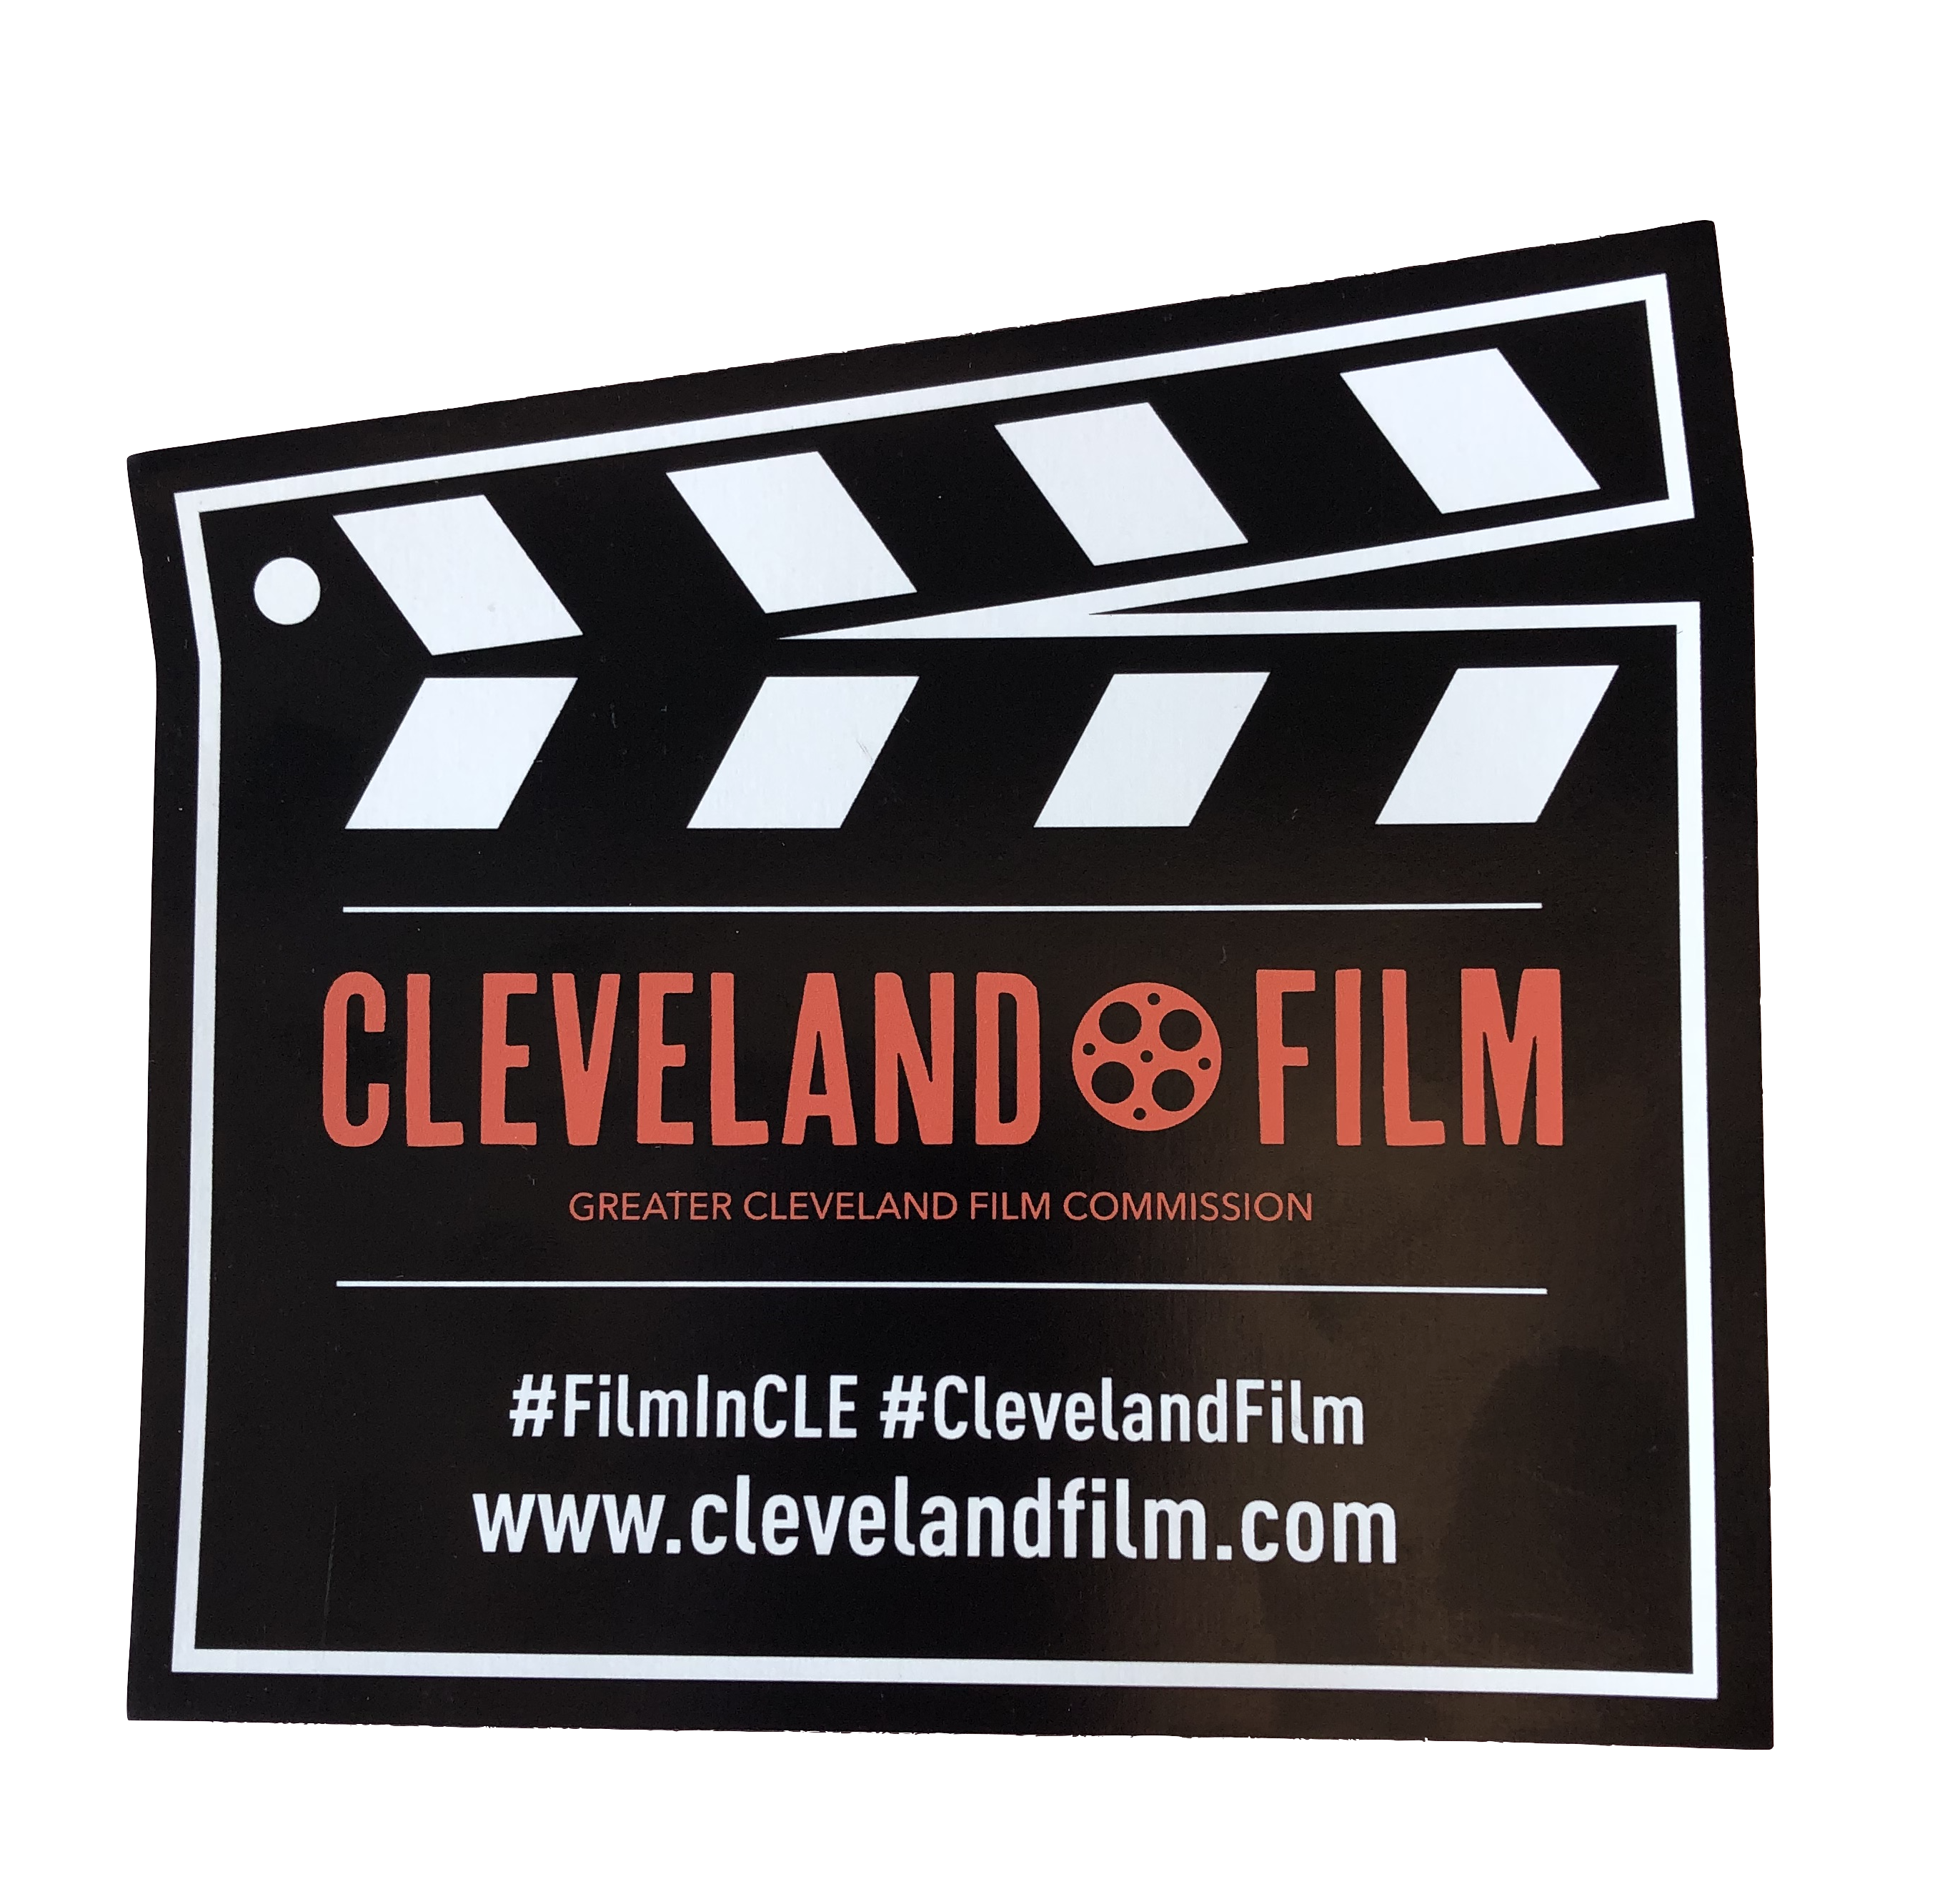 Films x in Cleveland